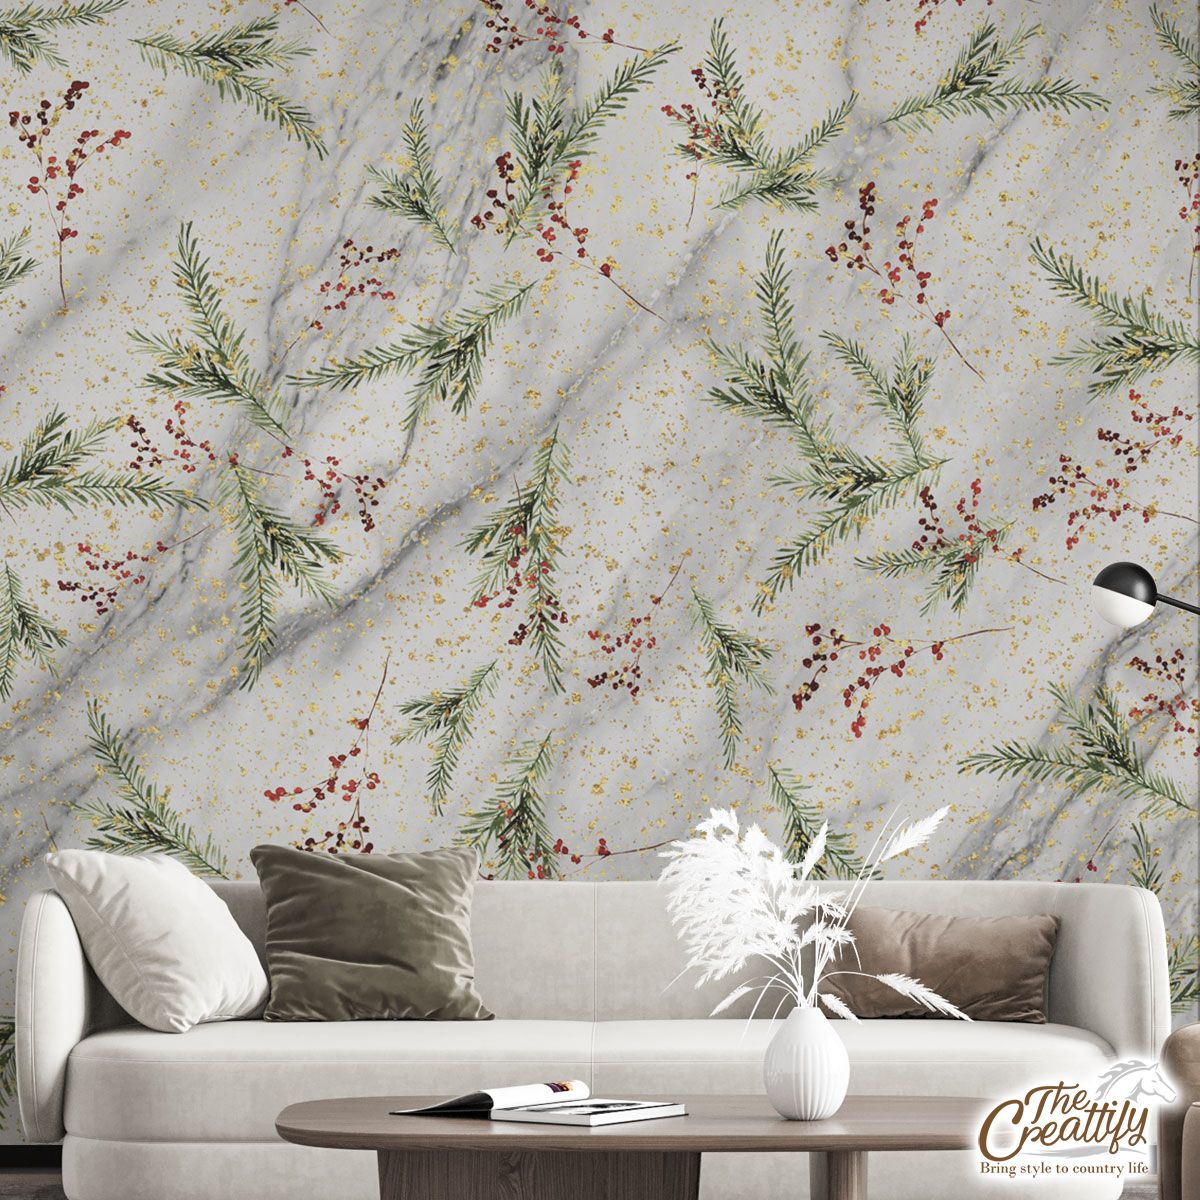 Red Berries With Pine Twig Pattern Wall Mural